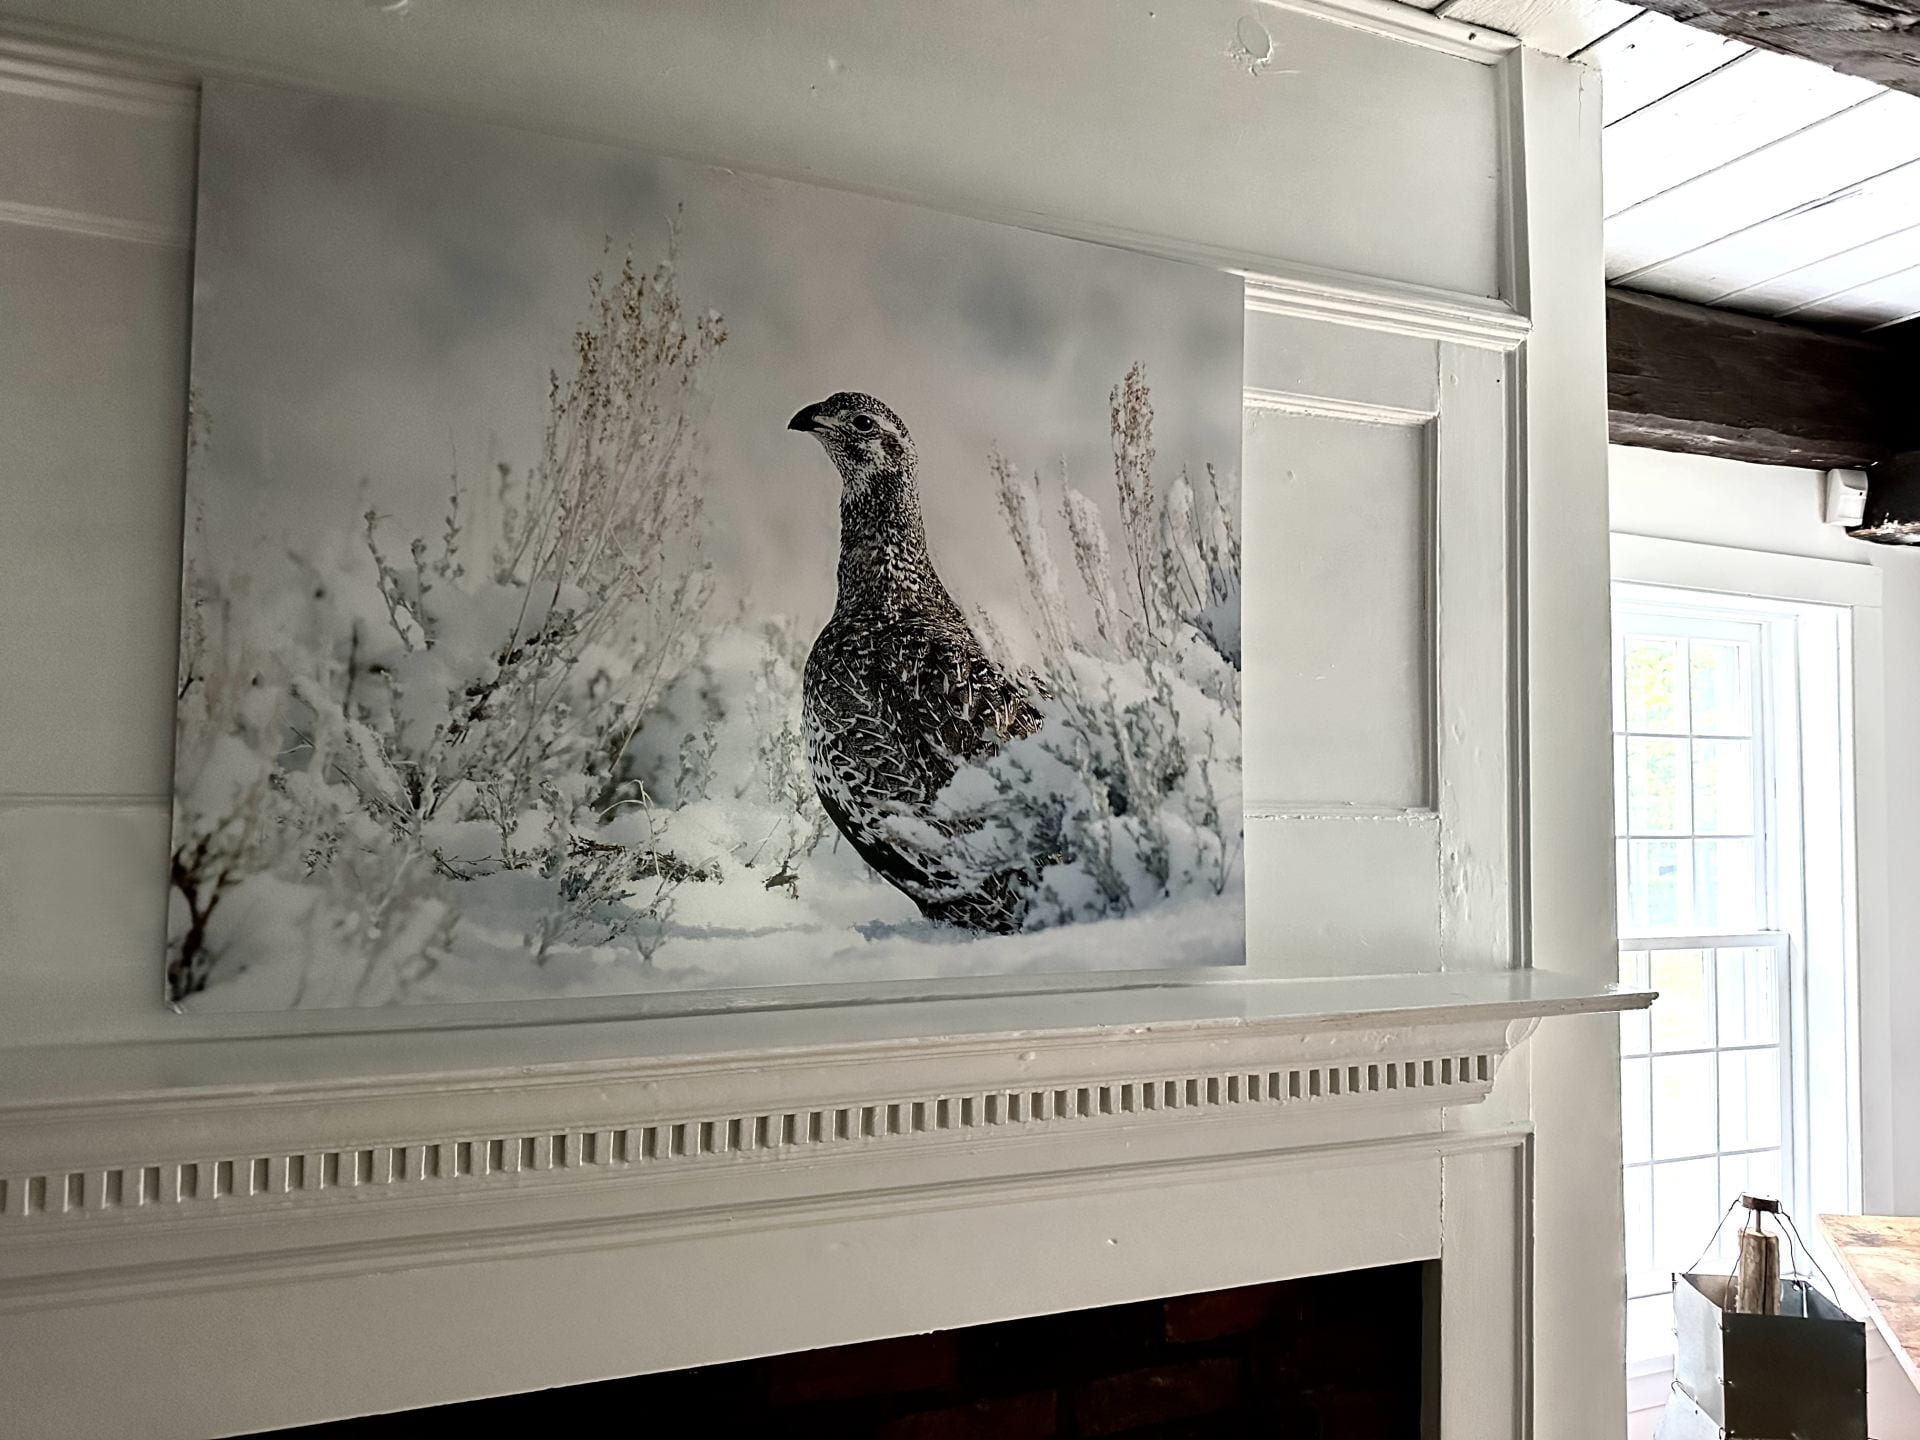 photograph of one of the prints, a grouse, over a fireplace at the Kelly Adirondack Center